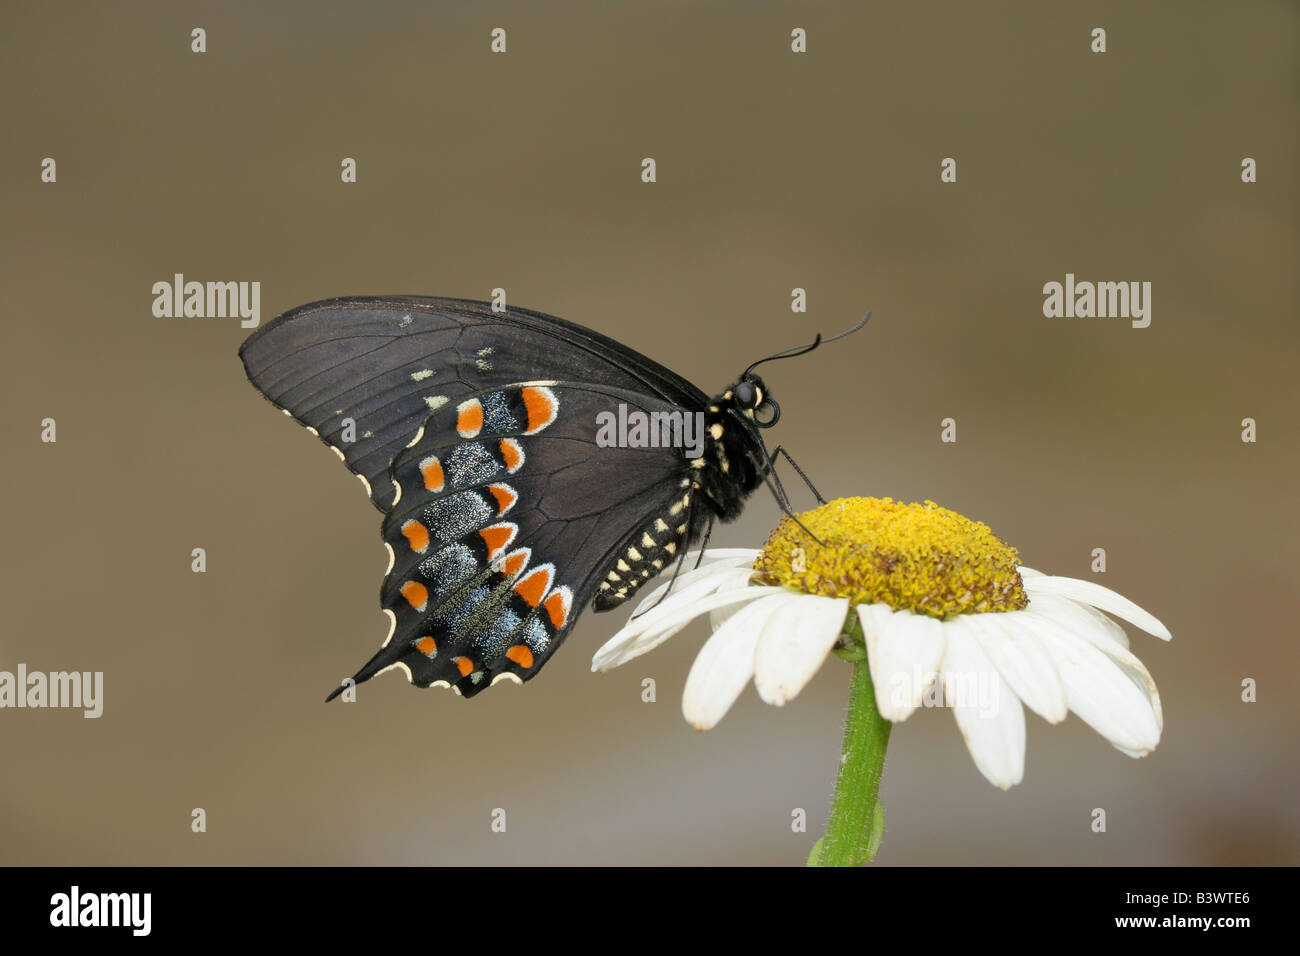 Black Swallowtail butterfly (Papilio polyxenes) pollinating a flower Stock Photo